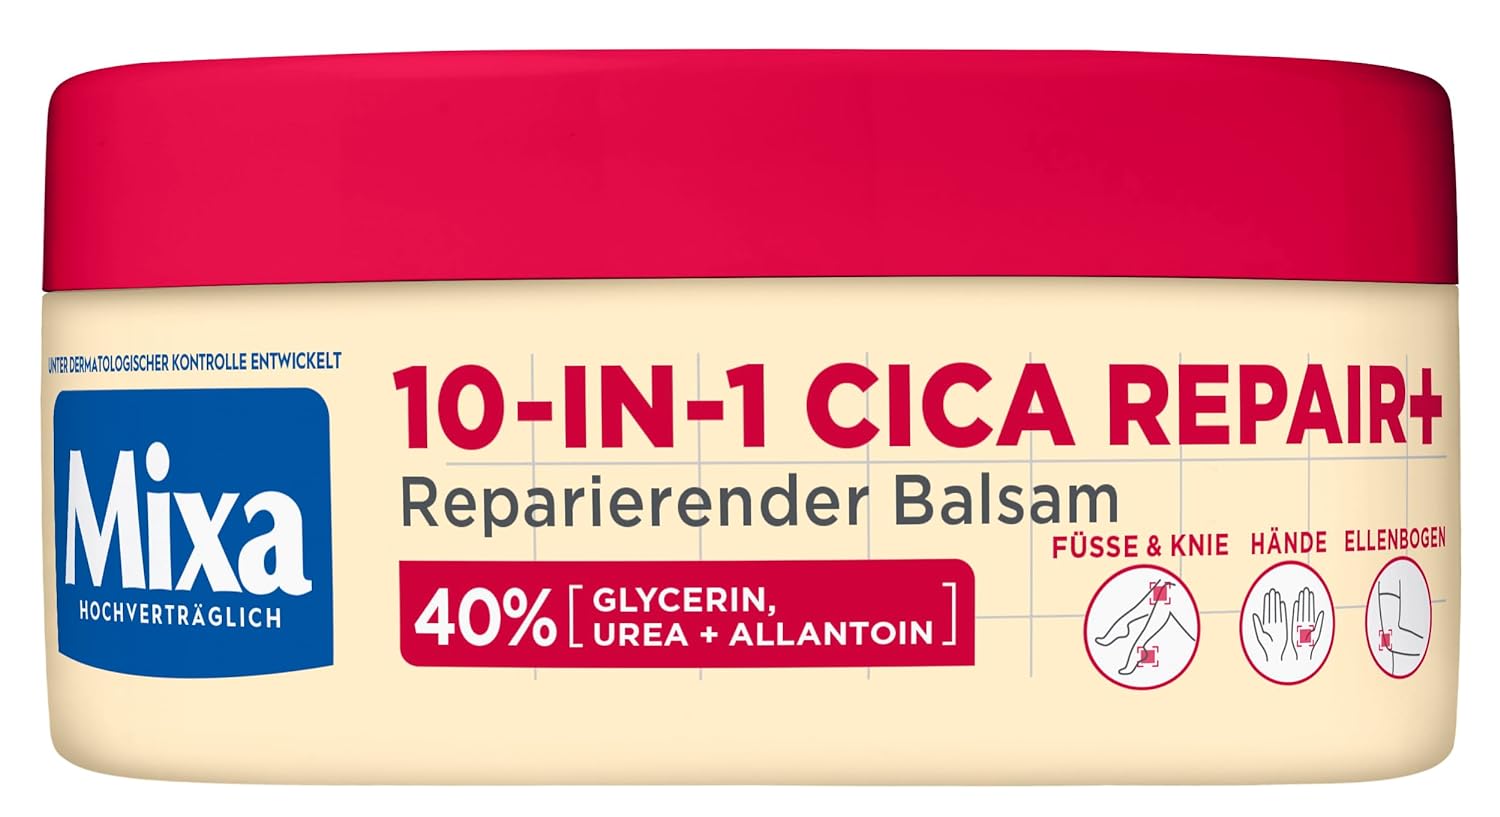 Mixa 10-in-1 Cica Repair+ Repair Balm with 40% glycerin, urea and allantoin for feet, knee, hands and elbows, 150 ml